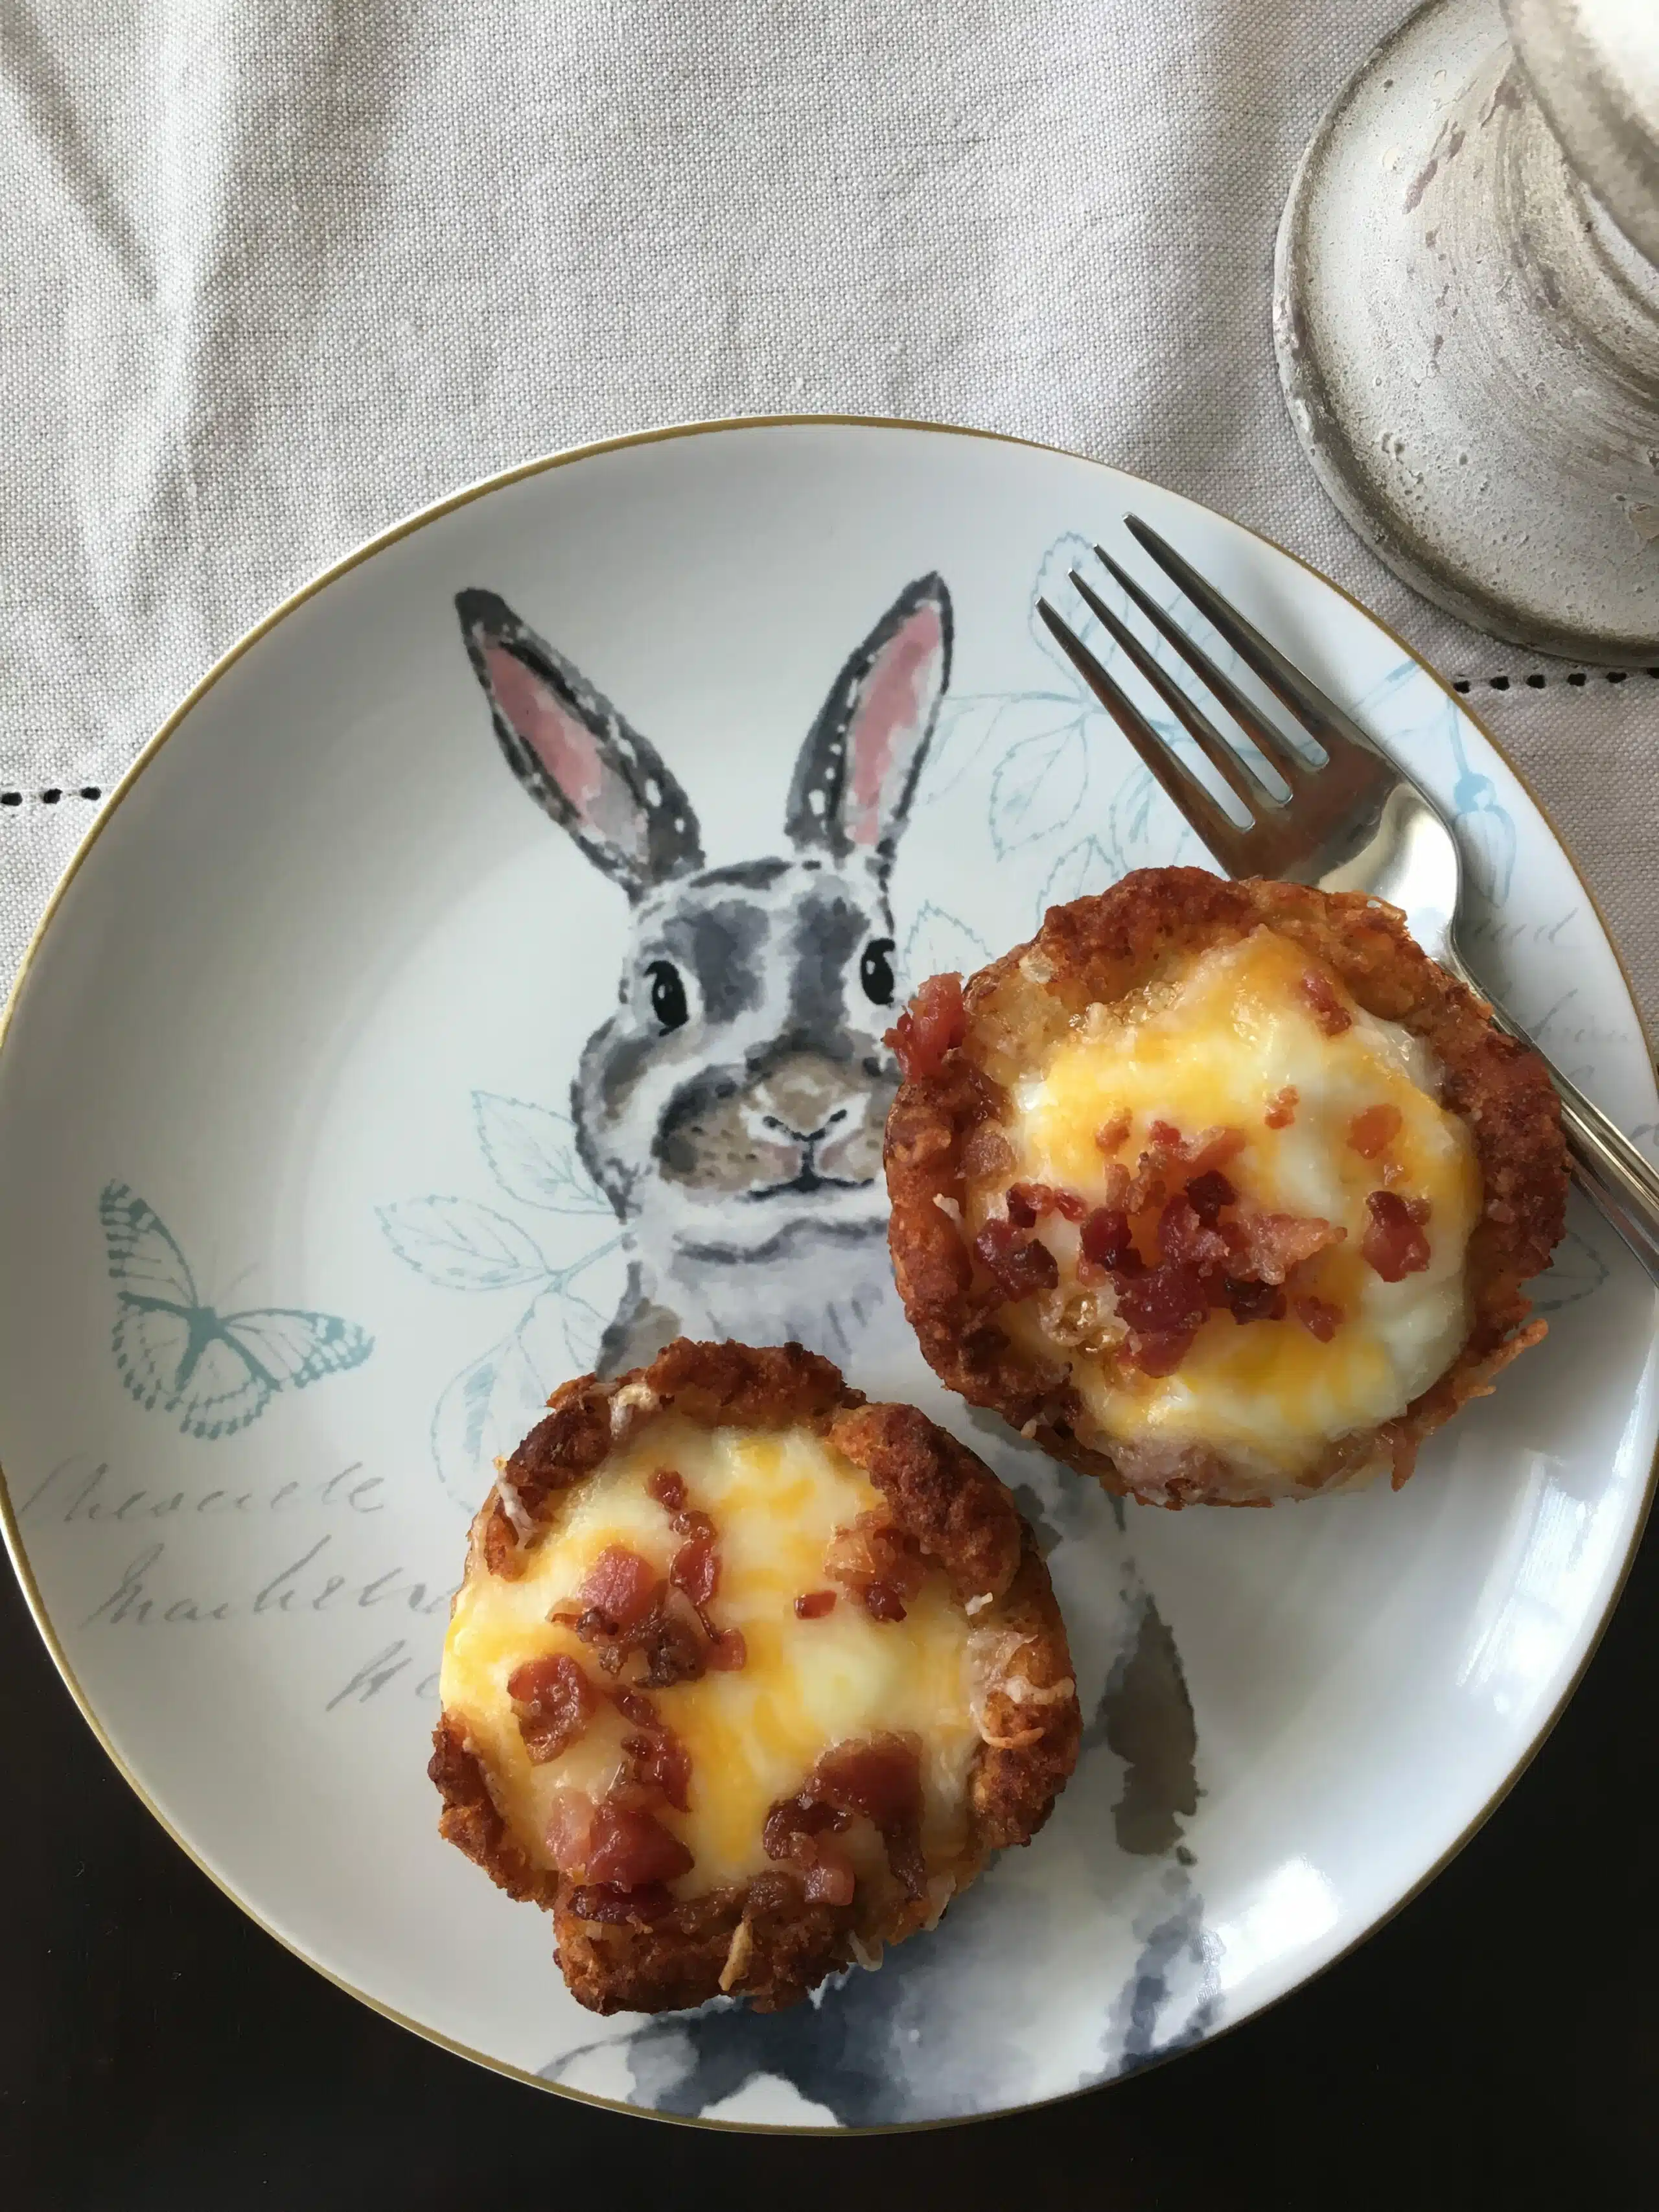 Potato nests with eggs bacon and cheese on a serving plate with a rabbit design.